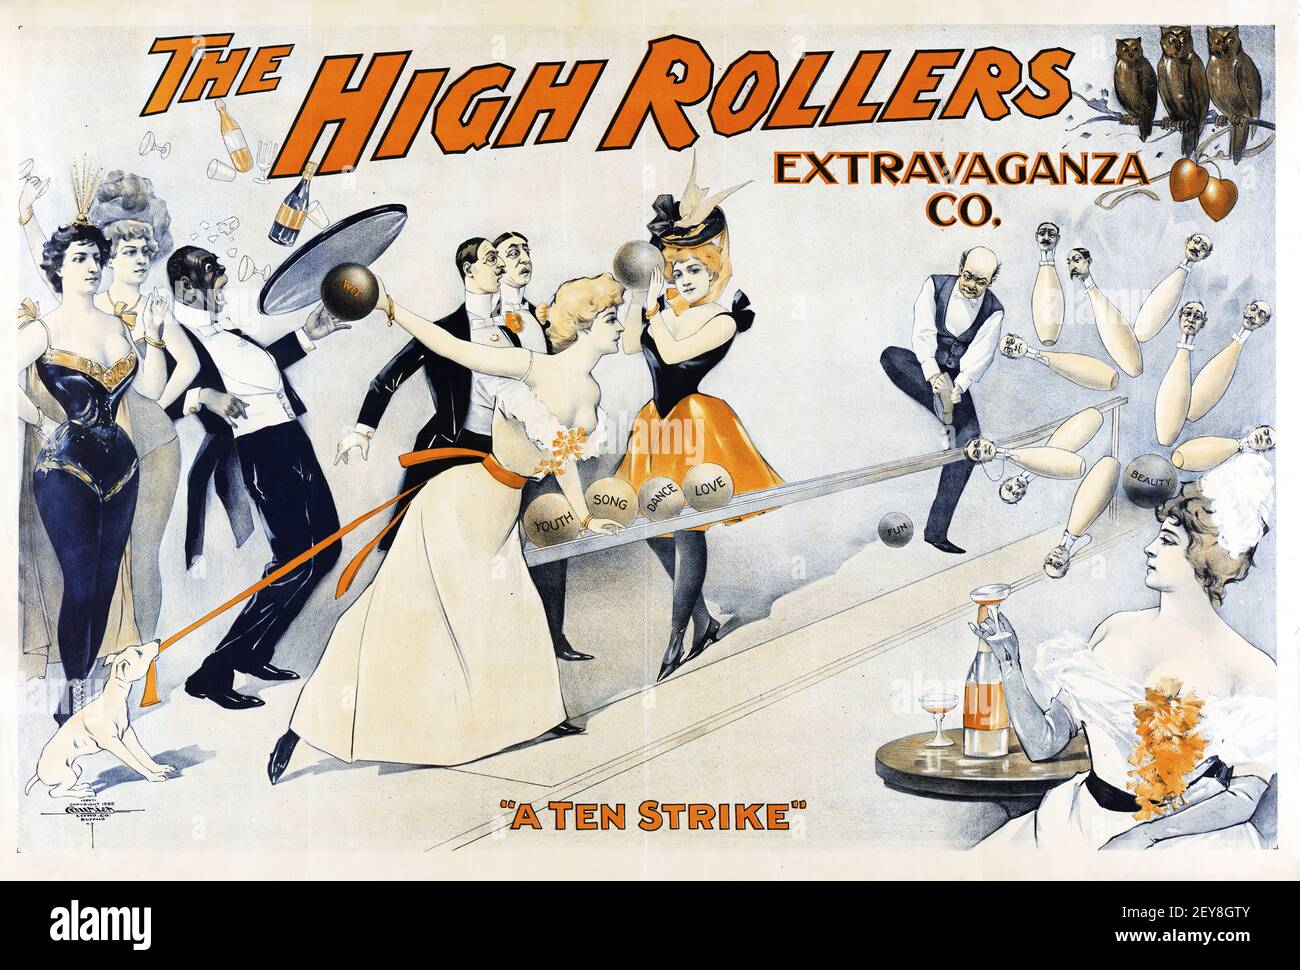 The High Rollers Extravaganza Co. Bowling, 'A Ten Strike'. Stockfoto